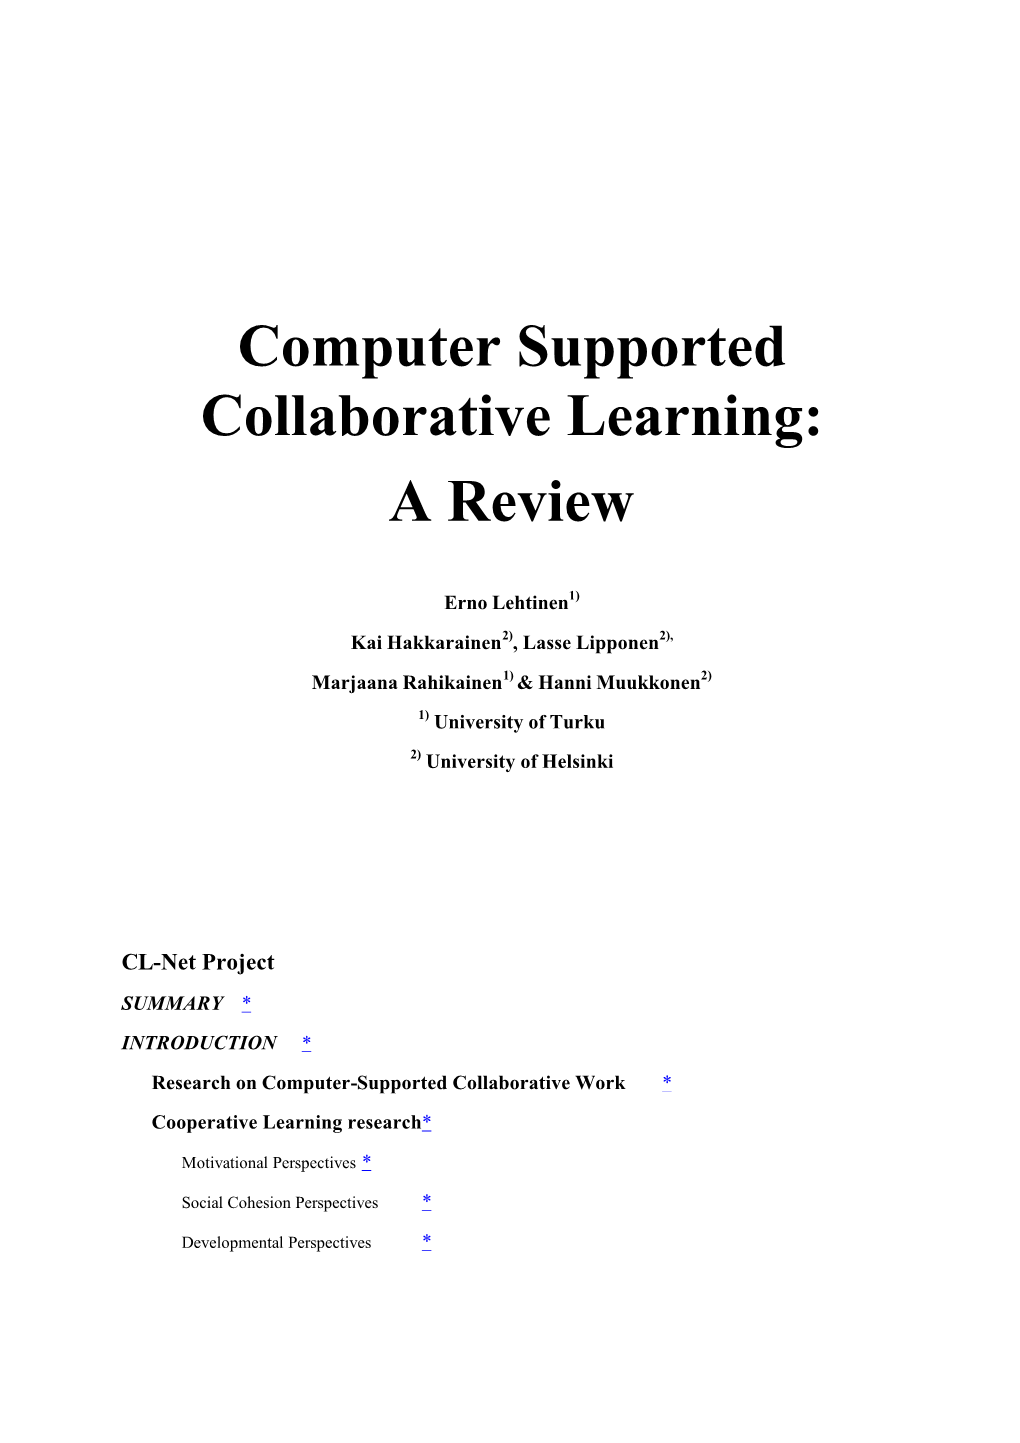 Computer Supported Collaborative Learning: a Review